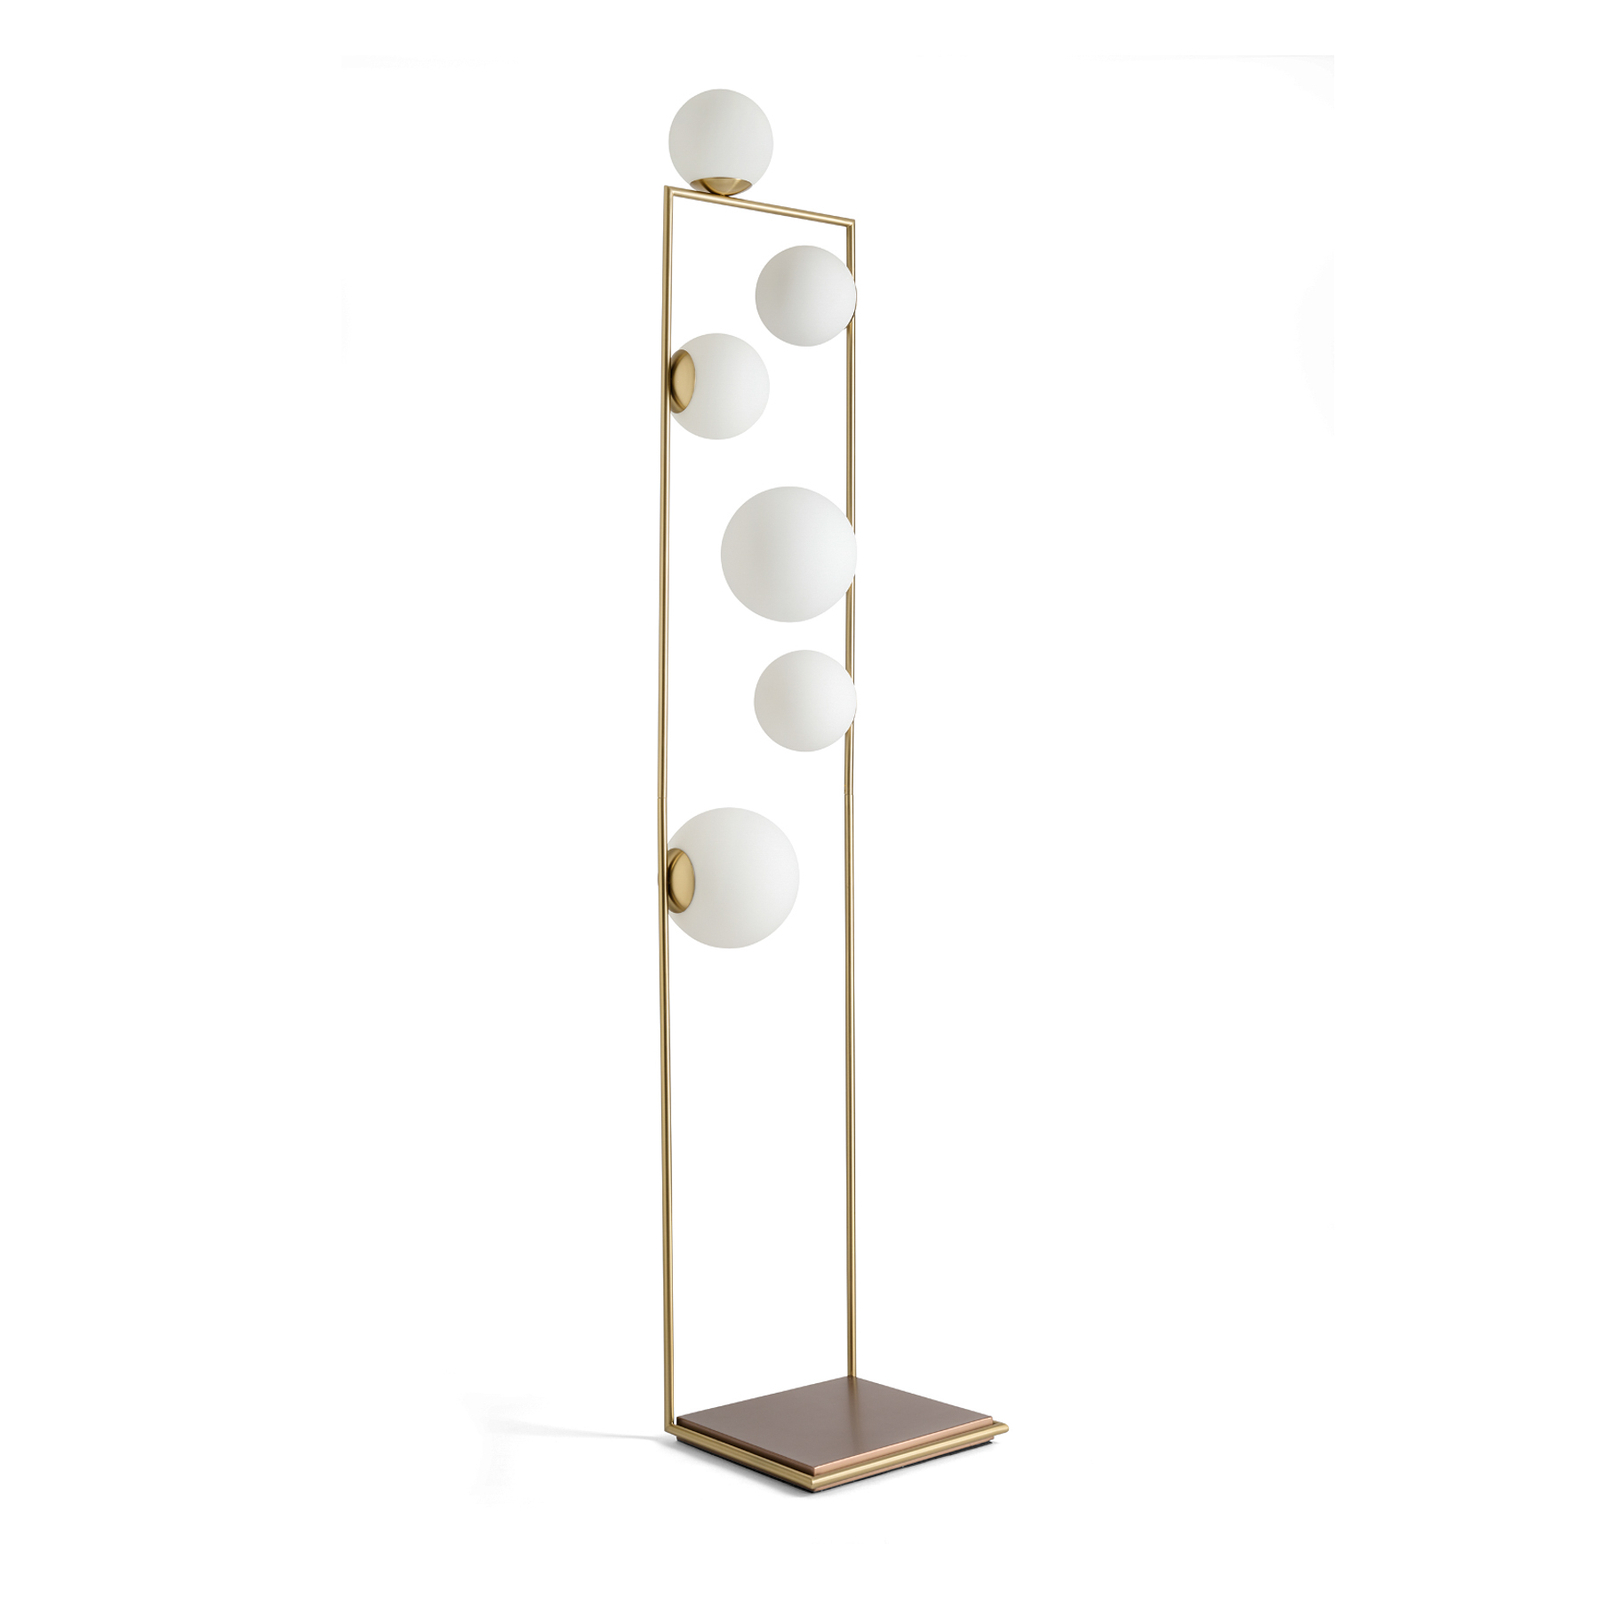 Buble floor lamp, gold, six opal glass shades